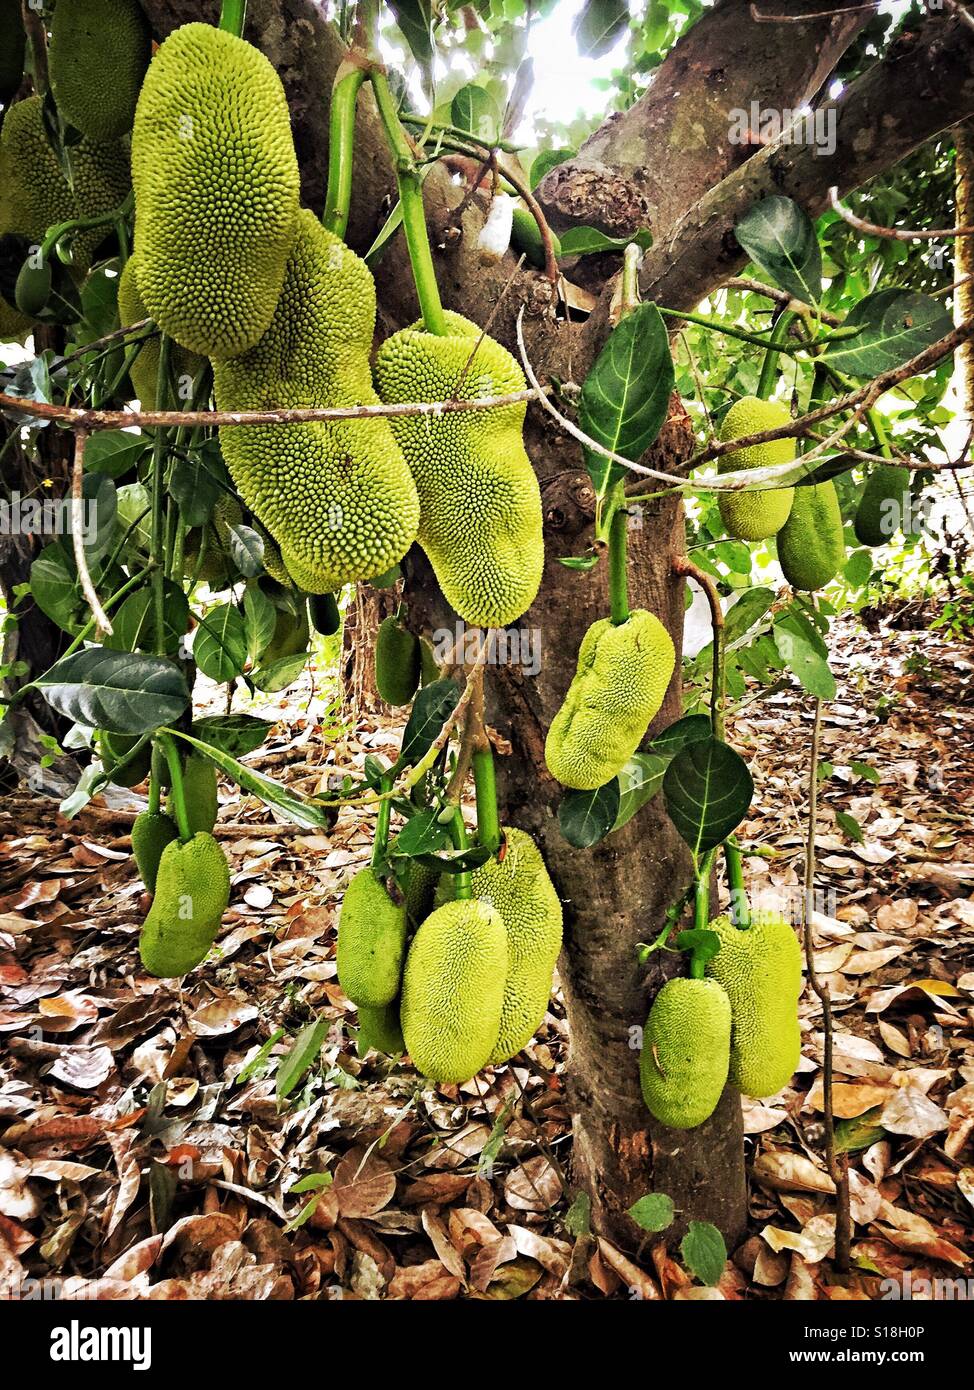 A tree is loaded with jackfruit in rural Nayarit, Mexico. Stock Photo